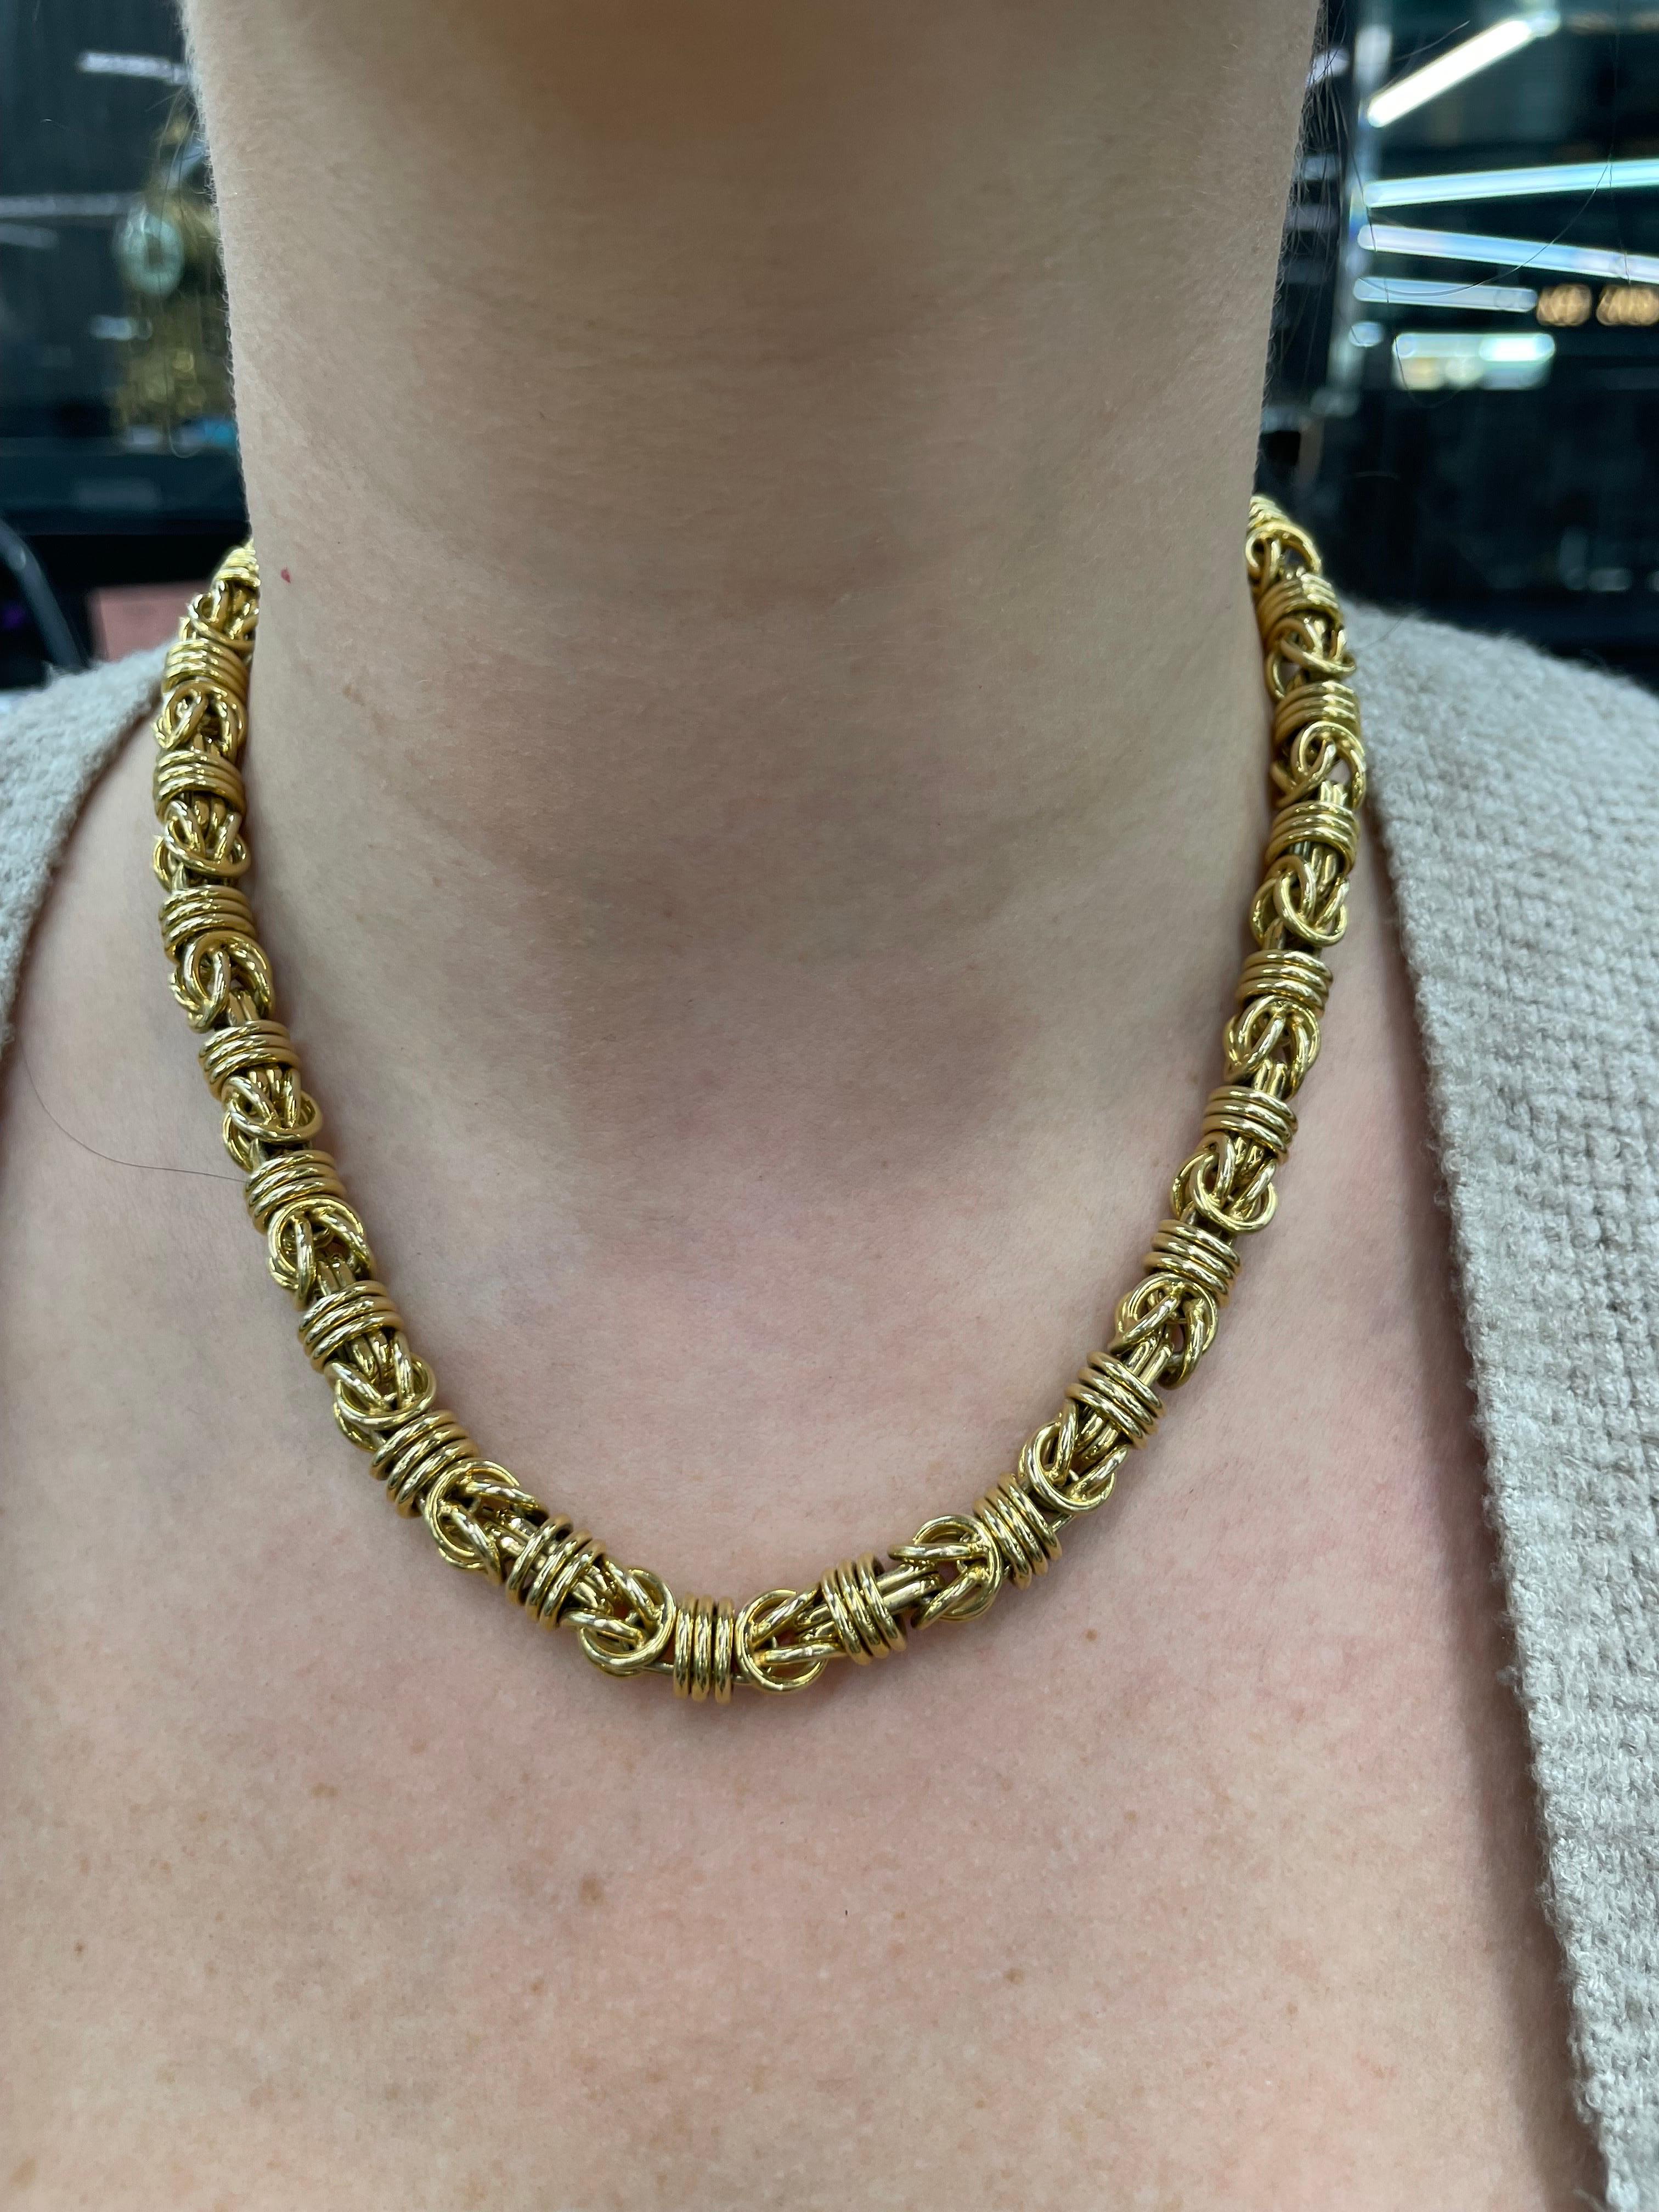 14 Karat Yellow Gold wide necklace featuring a Byzantine motif weighing 70 Grams, made in Italy.
Lots of Byzantine chains in different lengths & widths.
Available in 18 Karat Gold 
DM for more pricing & pictures.